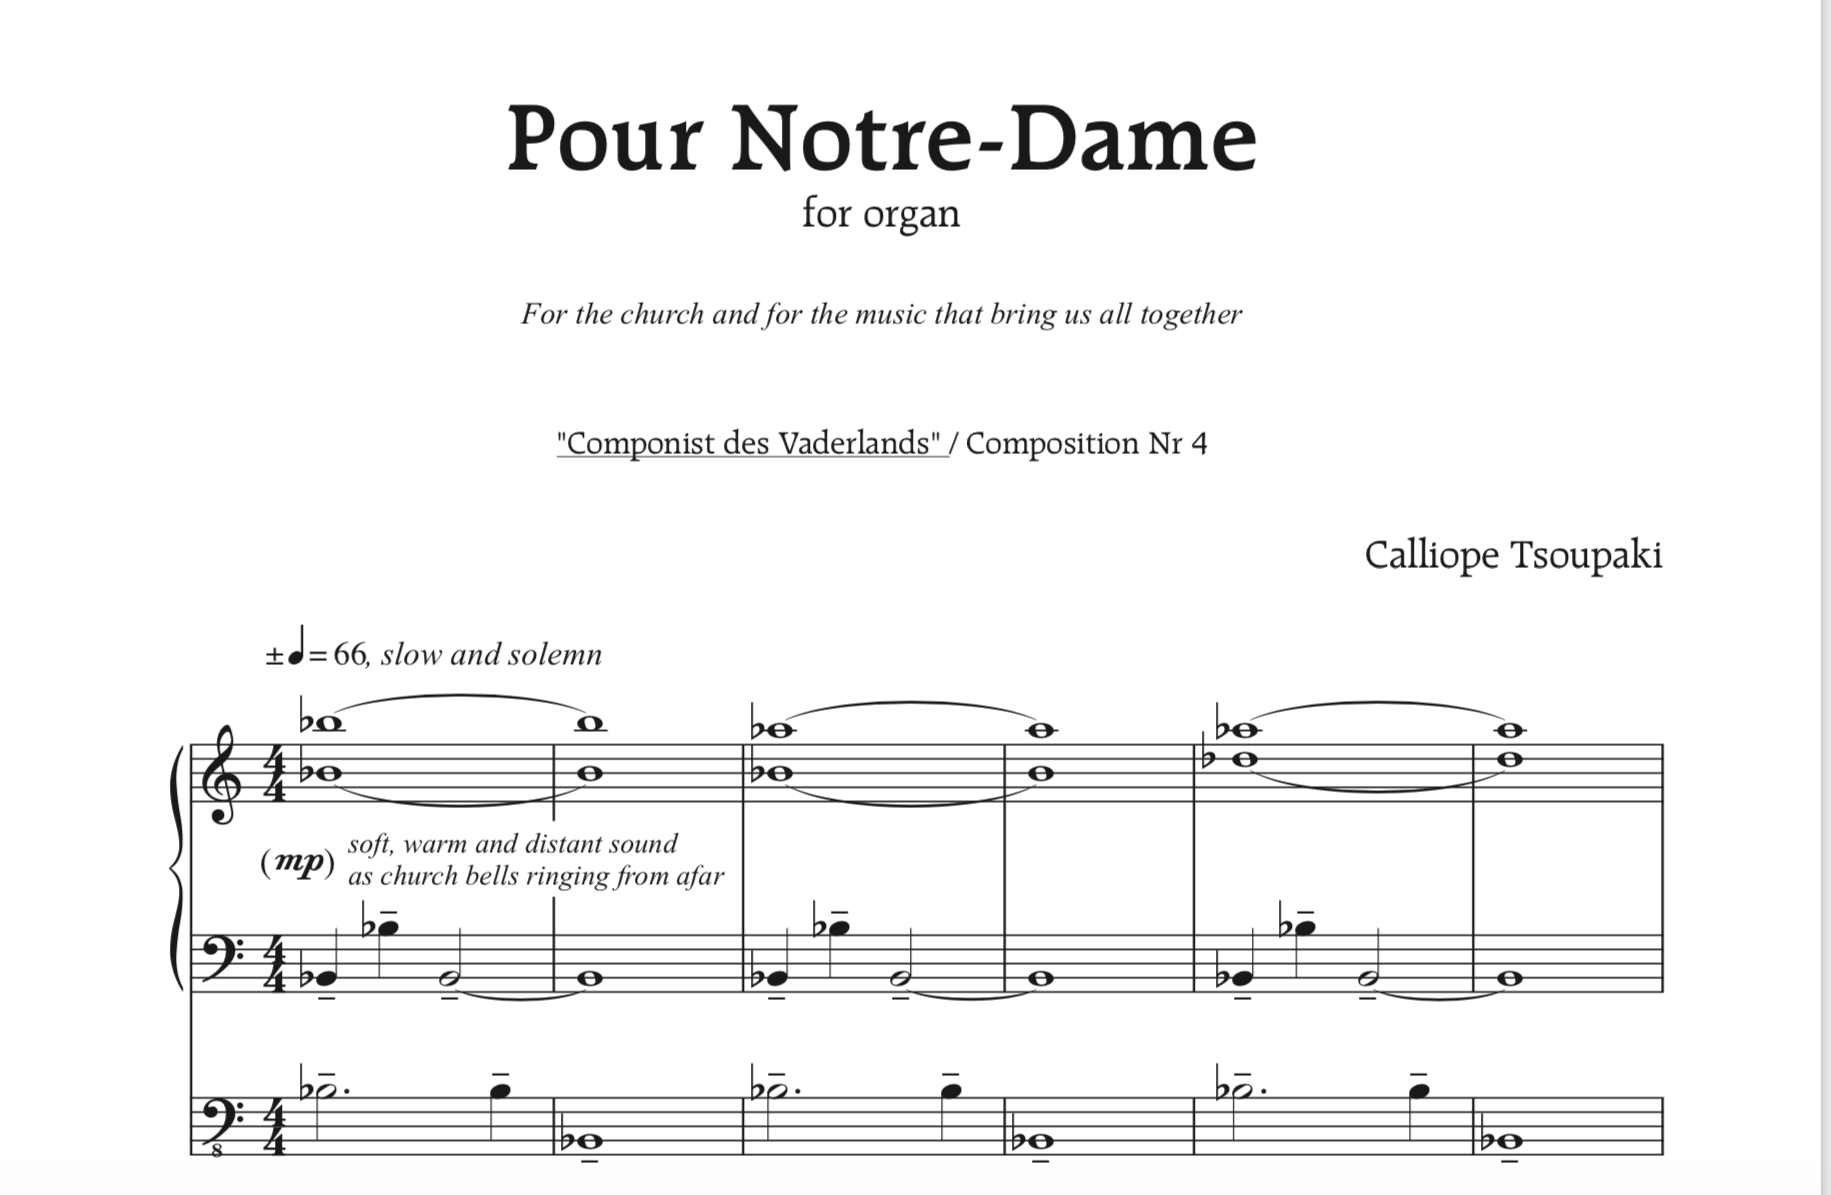 Calliope writes organ piece after the fire in Notre-Dame